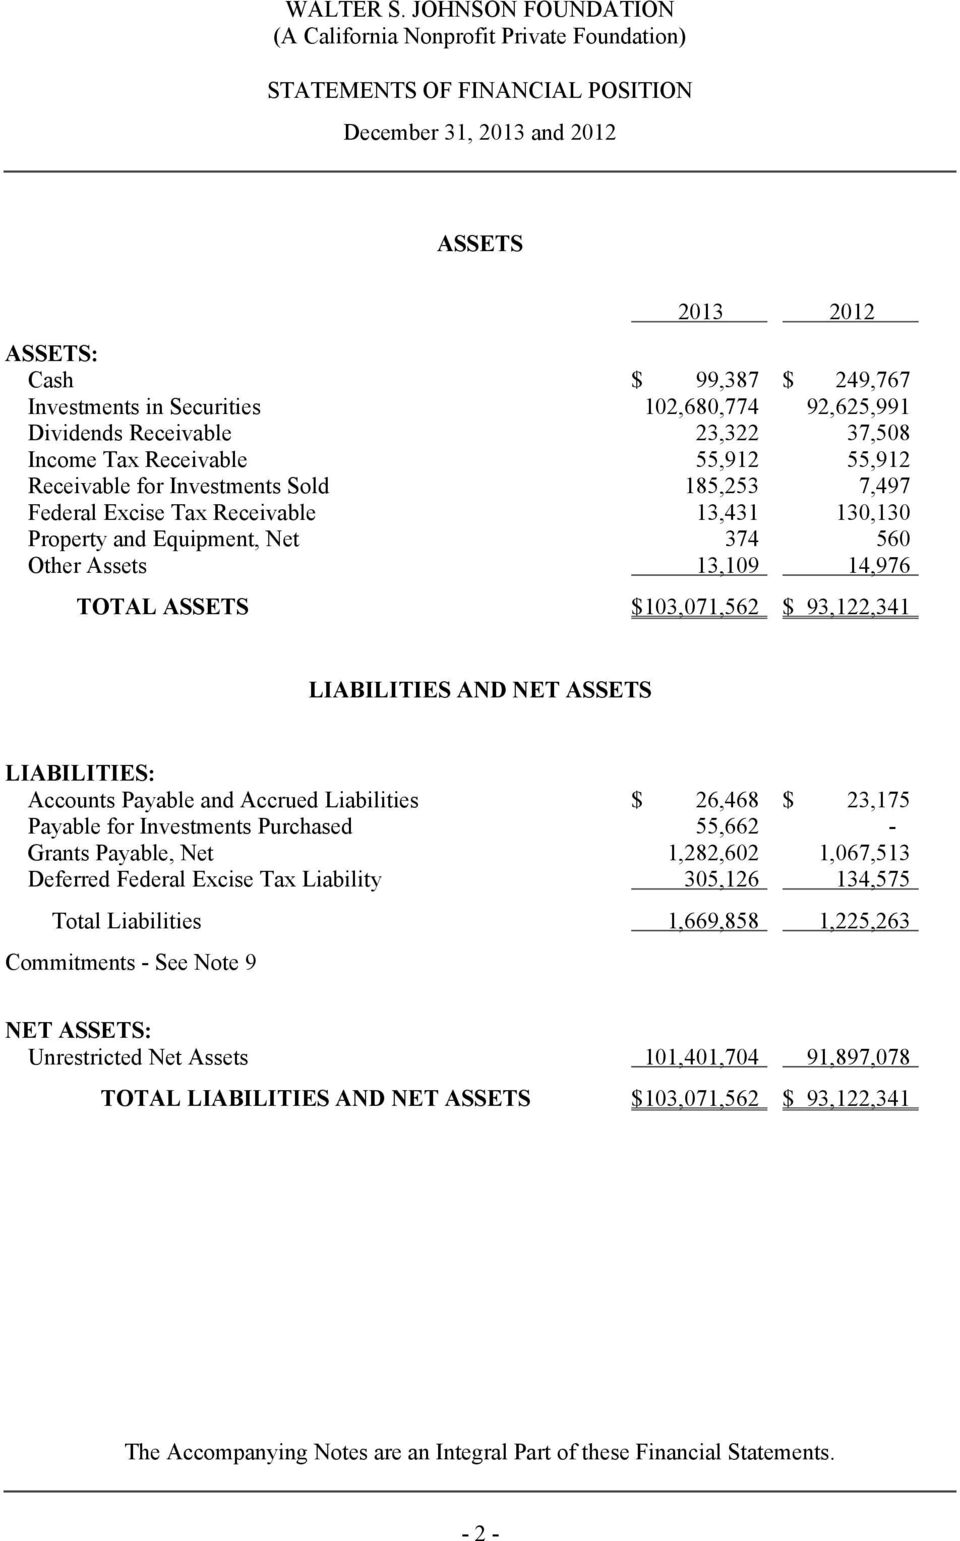 $103,071,562 $ 93,122,341 LIABILITIES AND NET ASSETS LIABILITIES: Accounts Payable and Accrued Liabilities $ 26,468 $ 23,175 Payable for Investments Purchased 55,662 - Grants Payable, Net 1,282,602